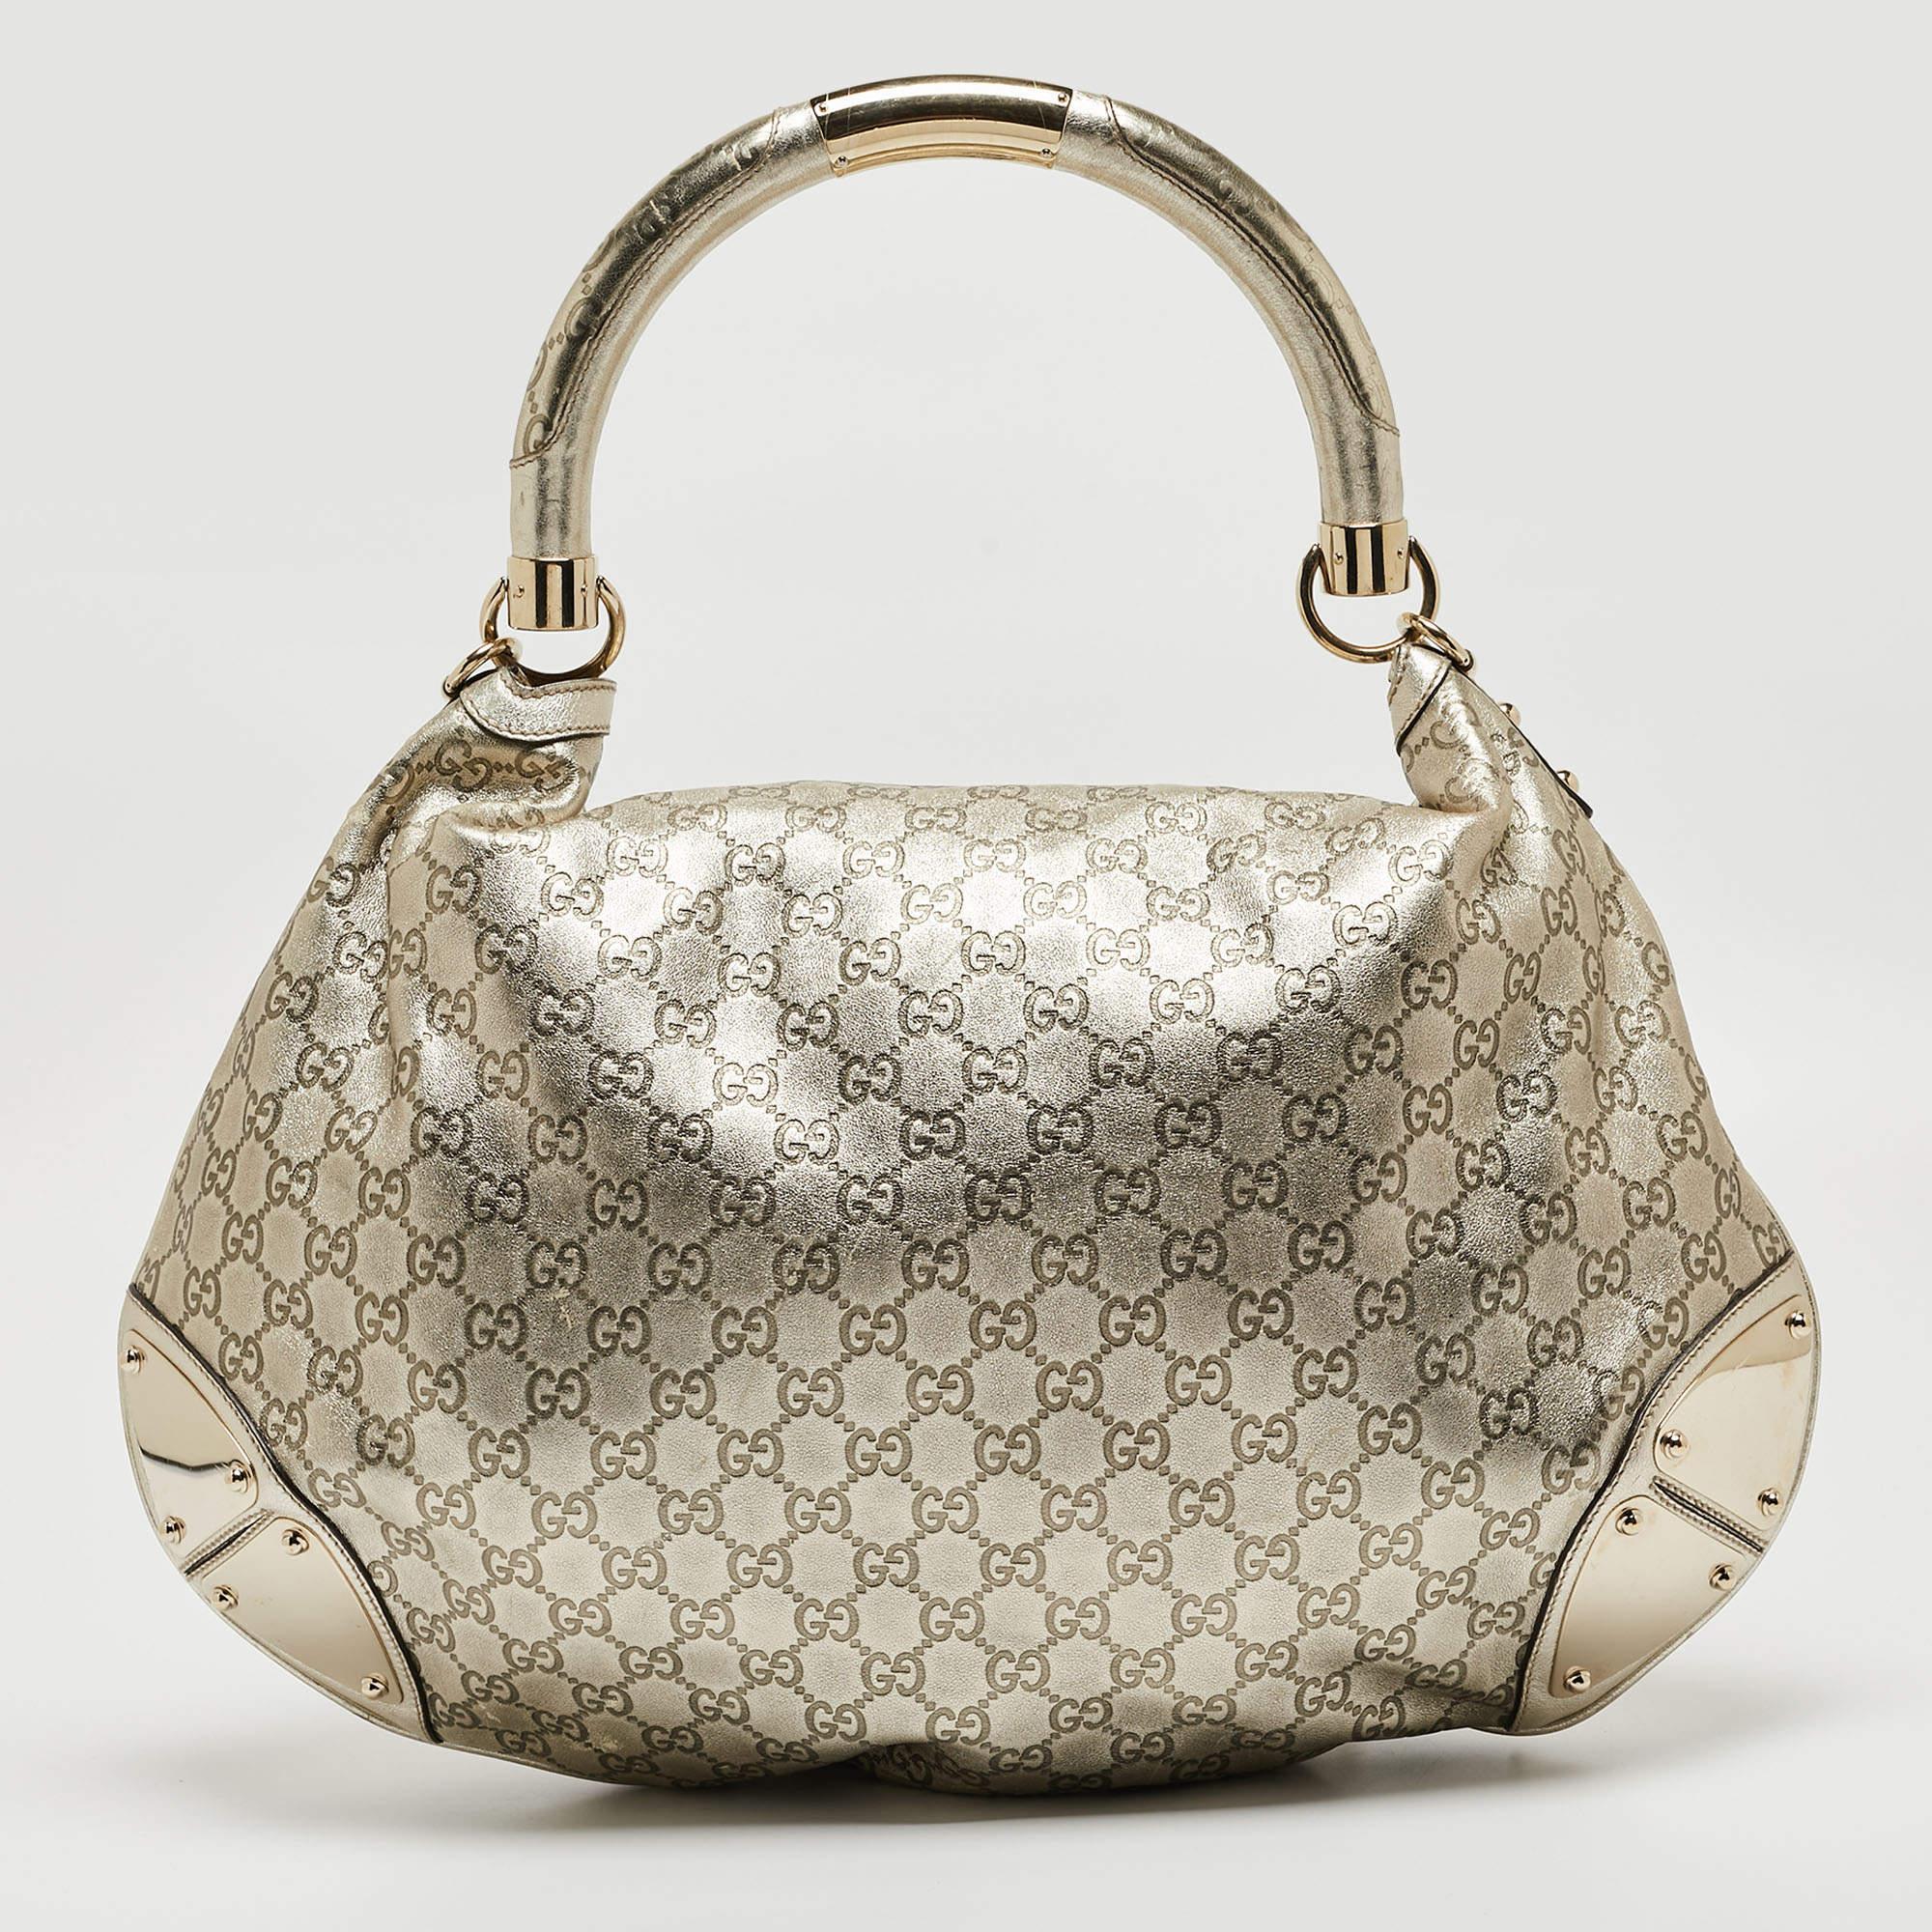 Stylish handbags never fail to make a fashionable impression. Make this designer hobo yours by pairing it with your sophisticated workwear as well as chic casual looks.

Includes: Detachable Strap